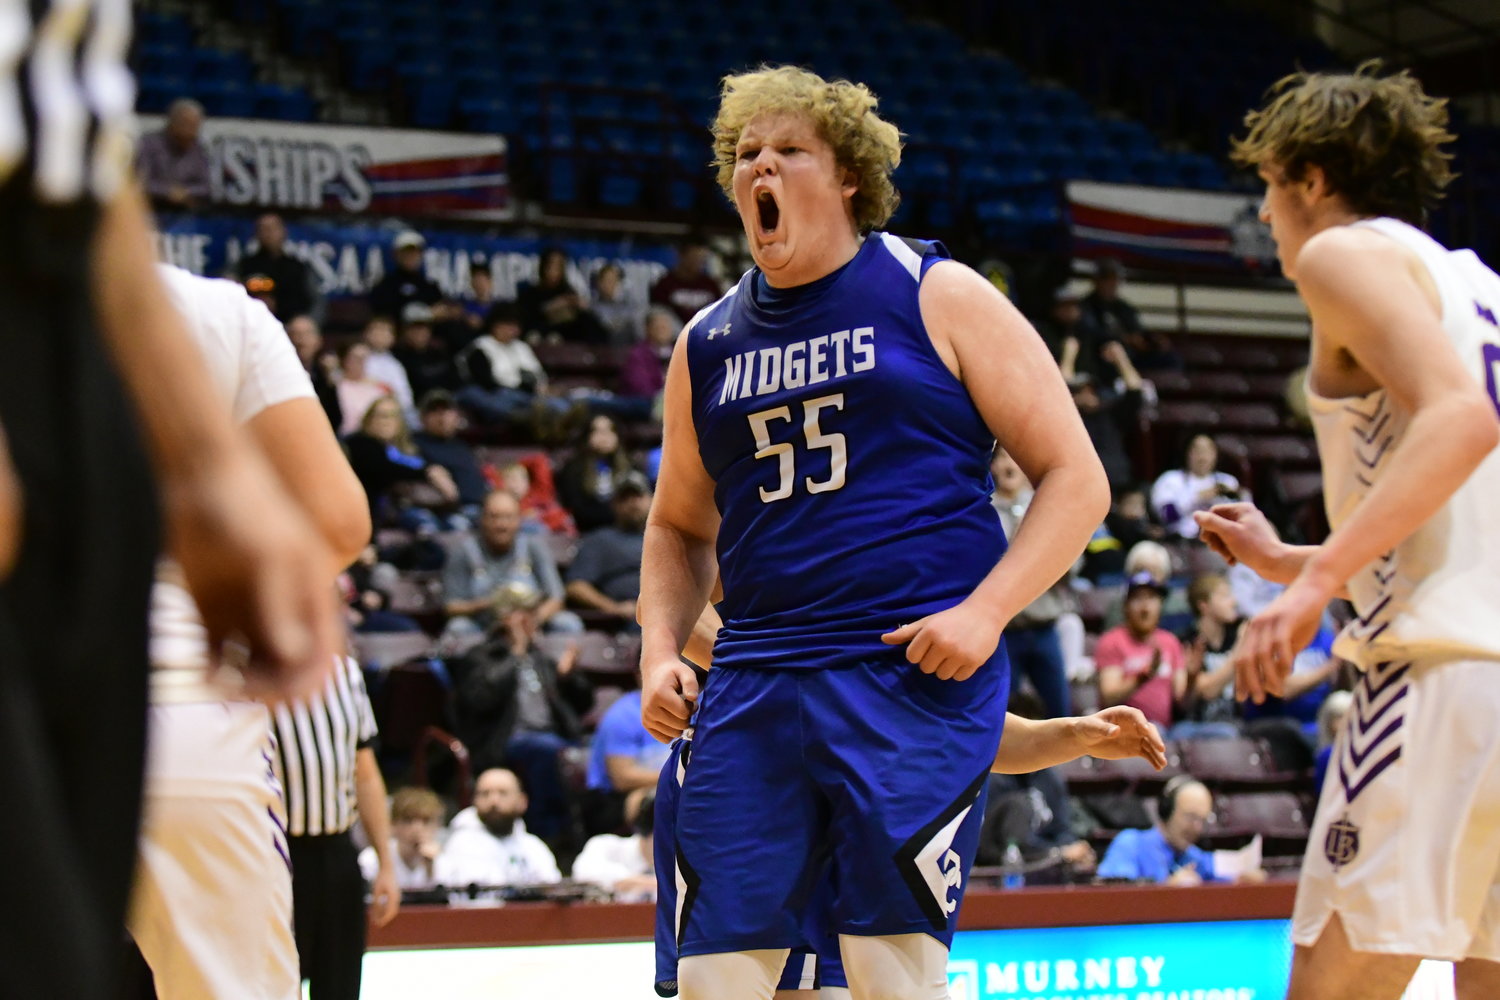 Putnam County's Landon Wood reacts after a basket against Bishop LeBlond in a Class 2 third-place game at the 2022 MSHSAA Show-Me Showdown.